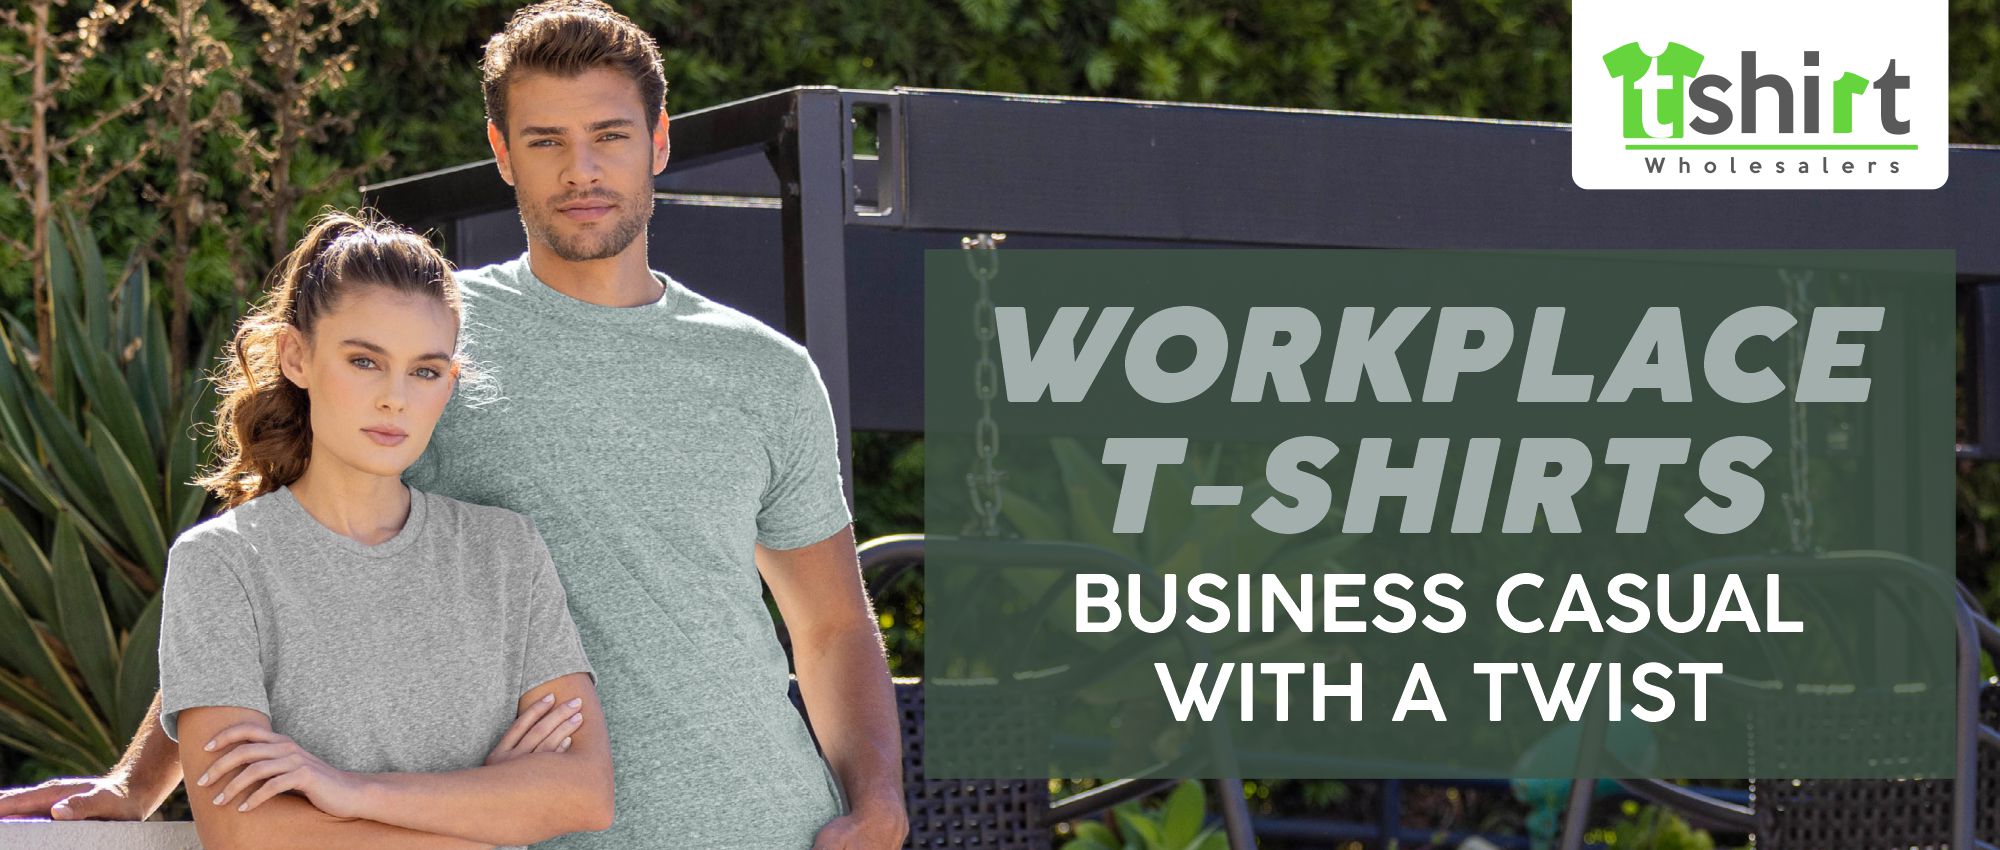 WORKPLACE T-SHIRTS BUSINESS CASUAL WITH A TWIST